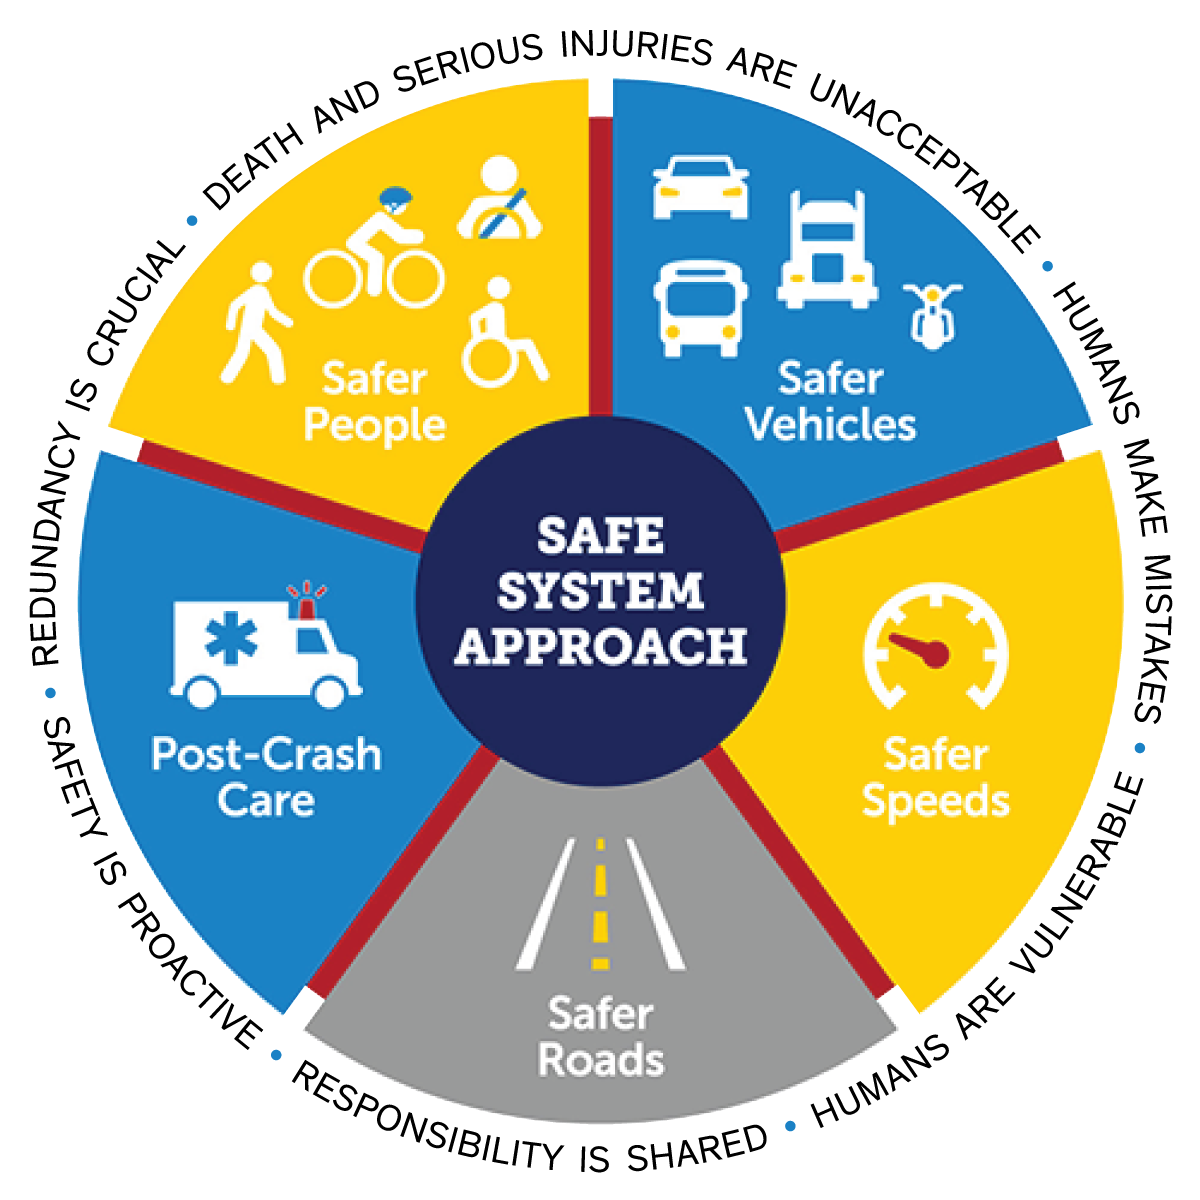 Safe System approach: safer people, safer vehicles, safer speeds, post-crash care, and safer roads. Death and serious injuries are unacceptable, humans make mistakes, humans are vulnerable, responsibility is shared, safety is proactive, and redundancy is crucial.